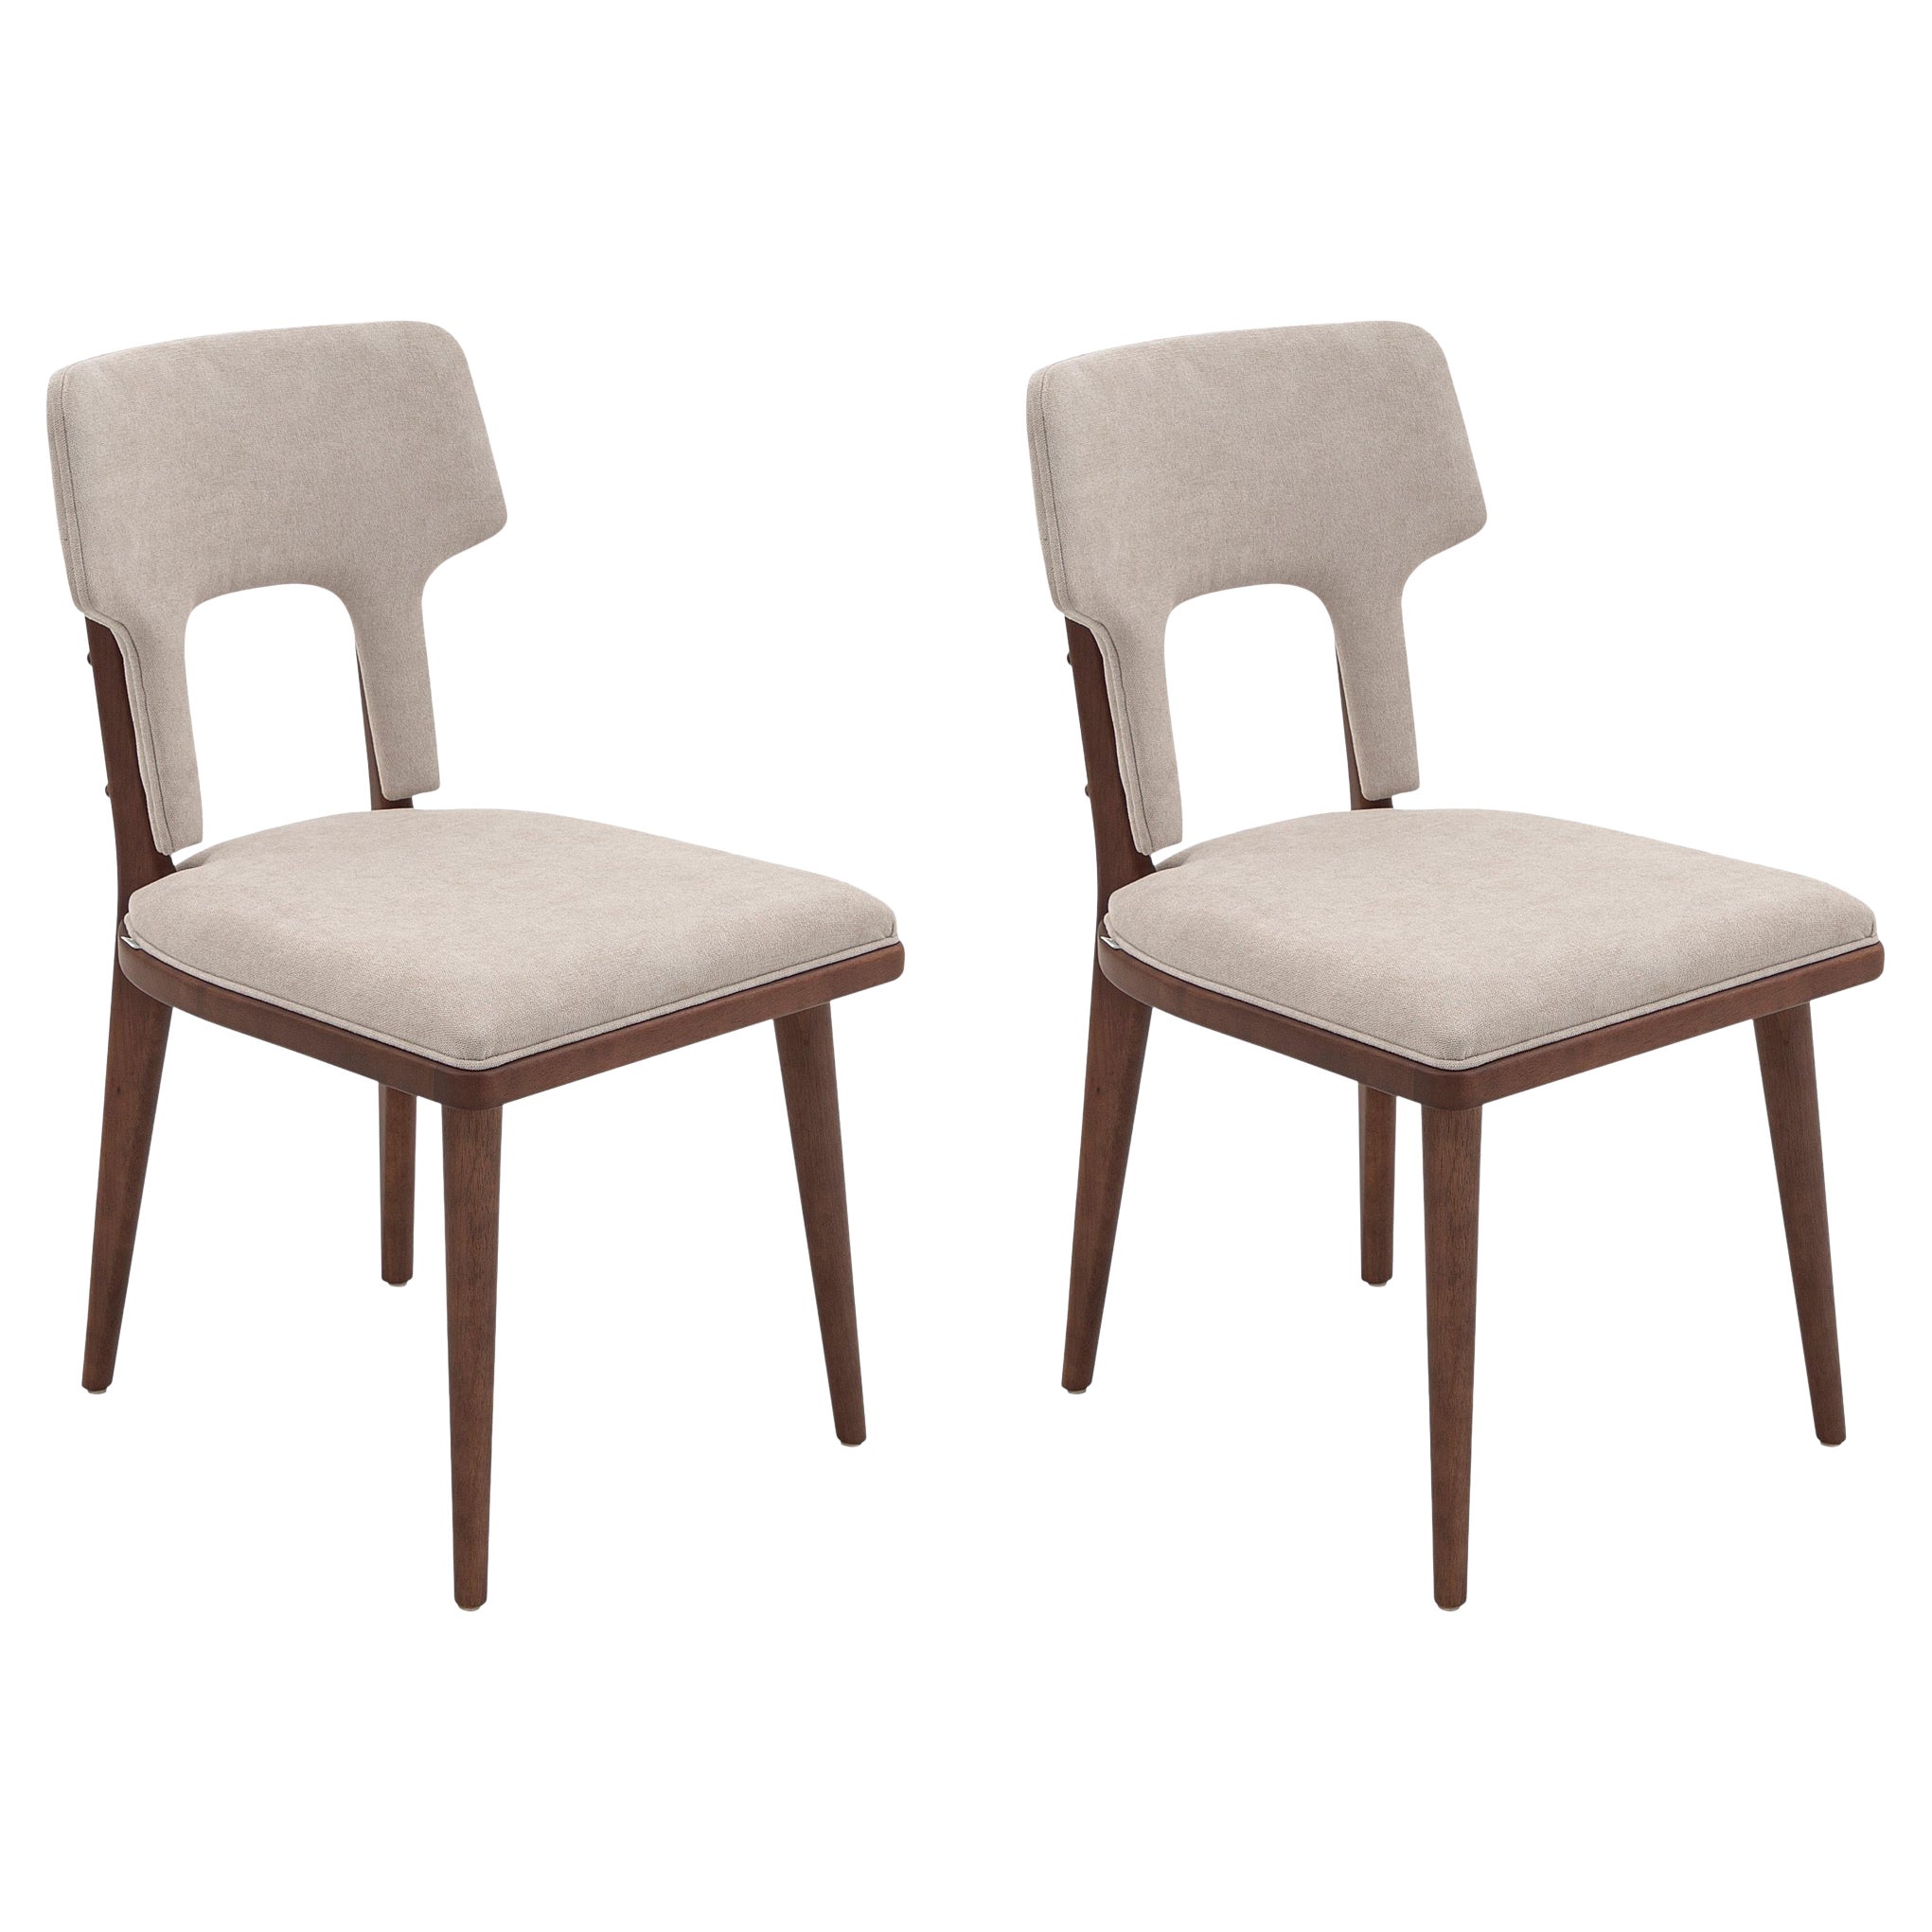 Fork Dining Chair in Light Beige Fabric and Walnut Wood Finish, Set of 2 For Sale